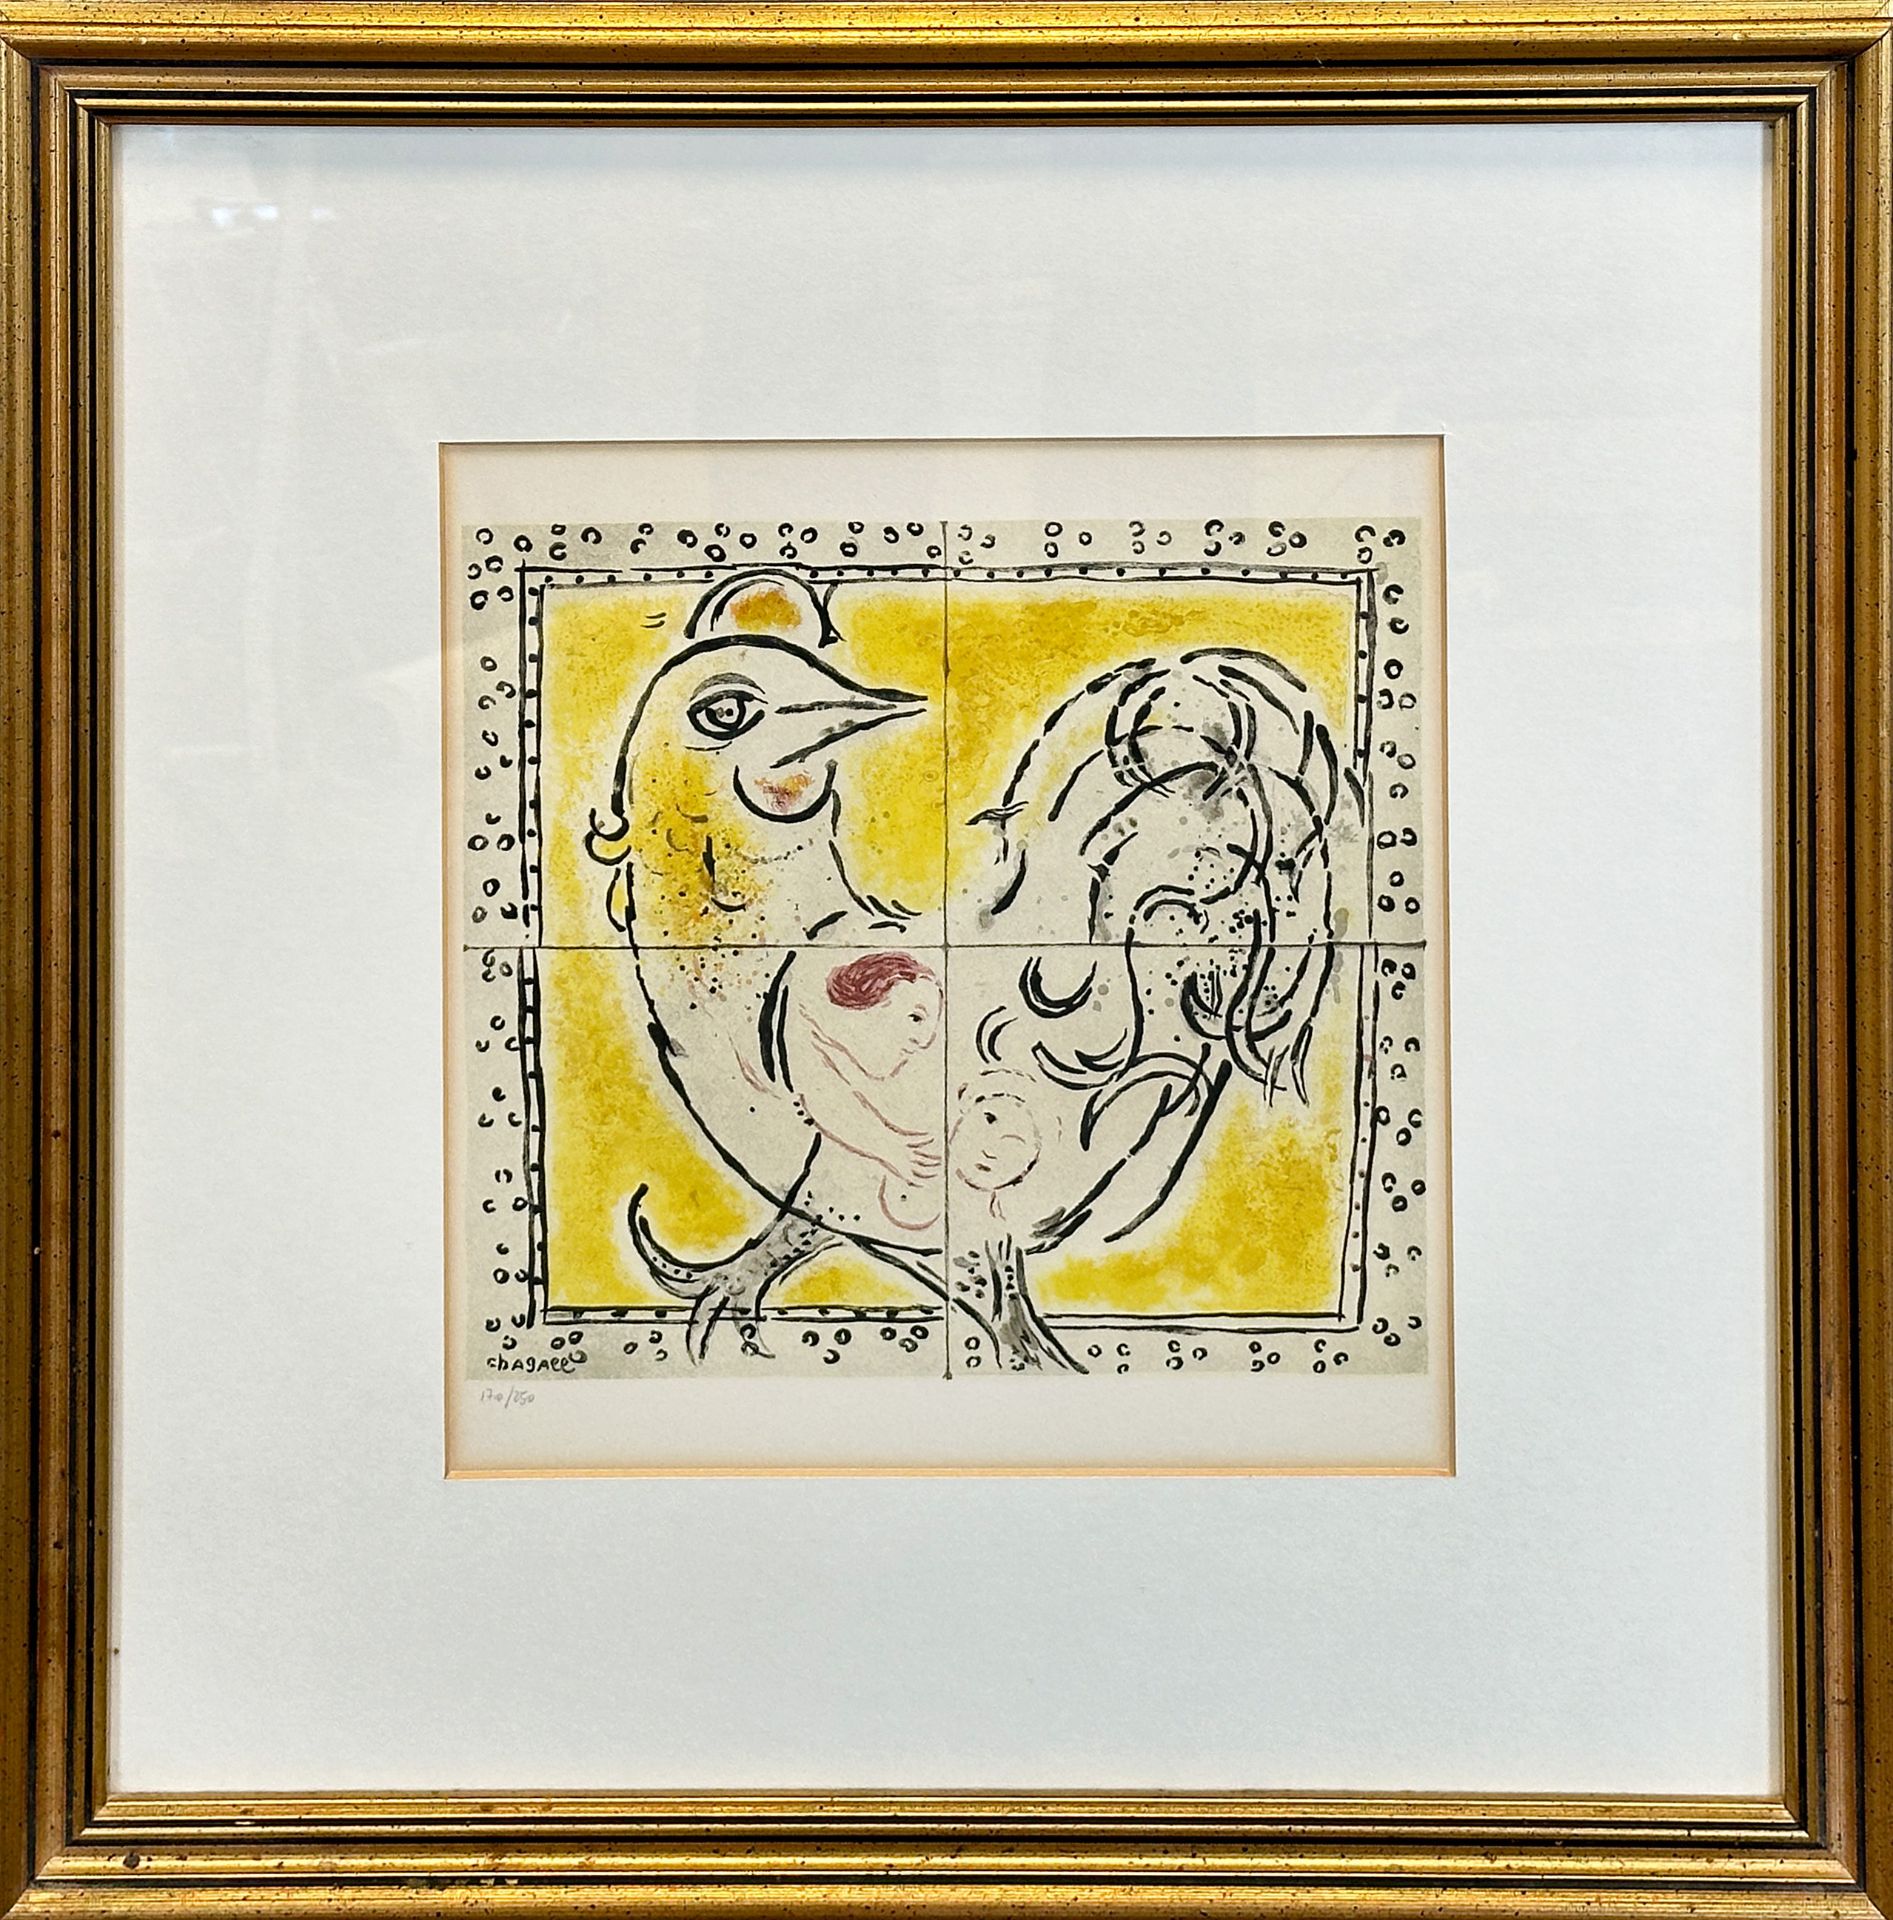 Marc CHAGALL (1887 - 1985). "Lovers in the cockerel". 1976. - Image 2 of 7